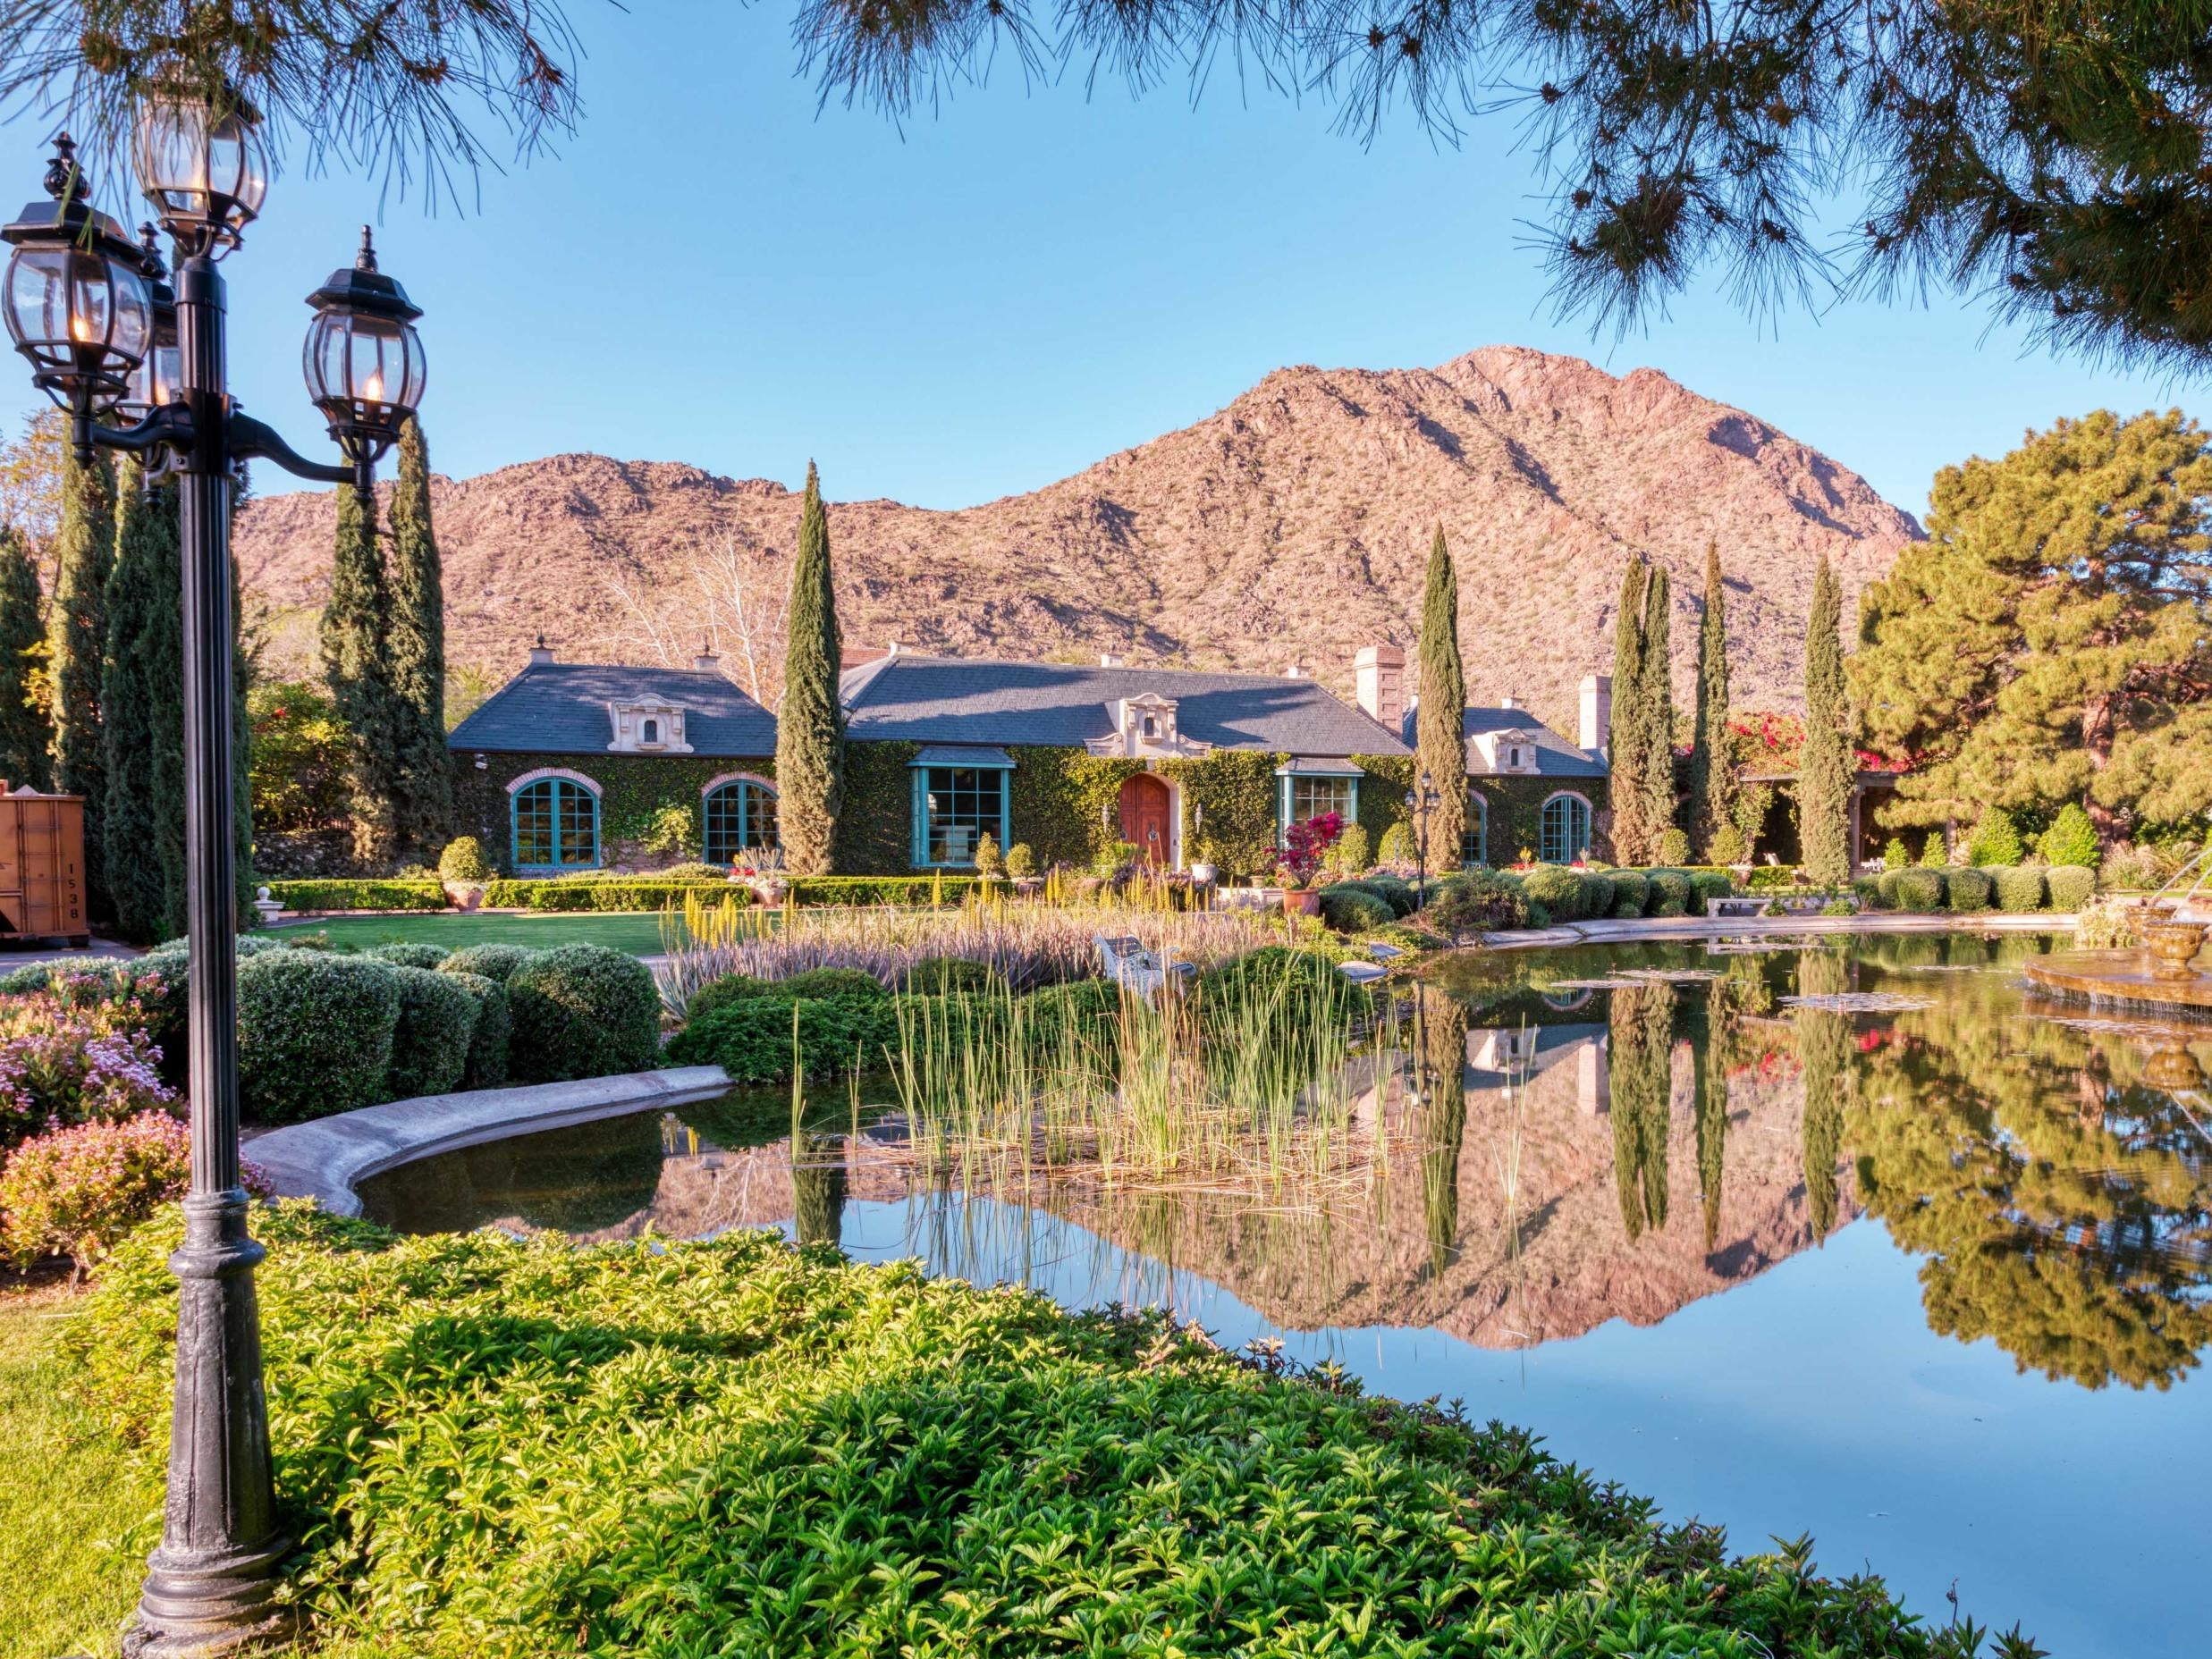 A sprawling Paradise Valley home on sale for $18 million